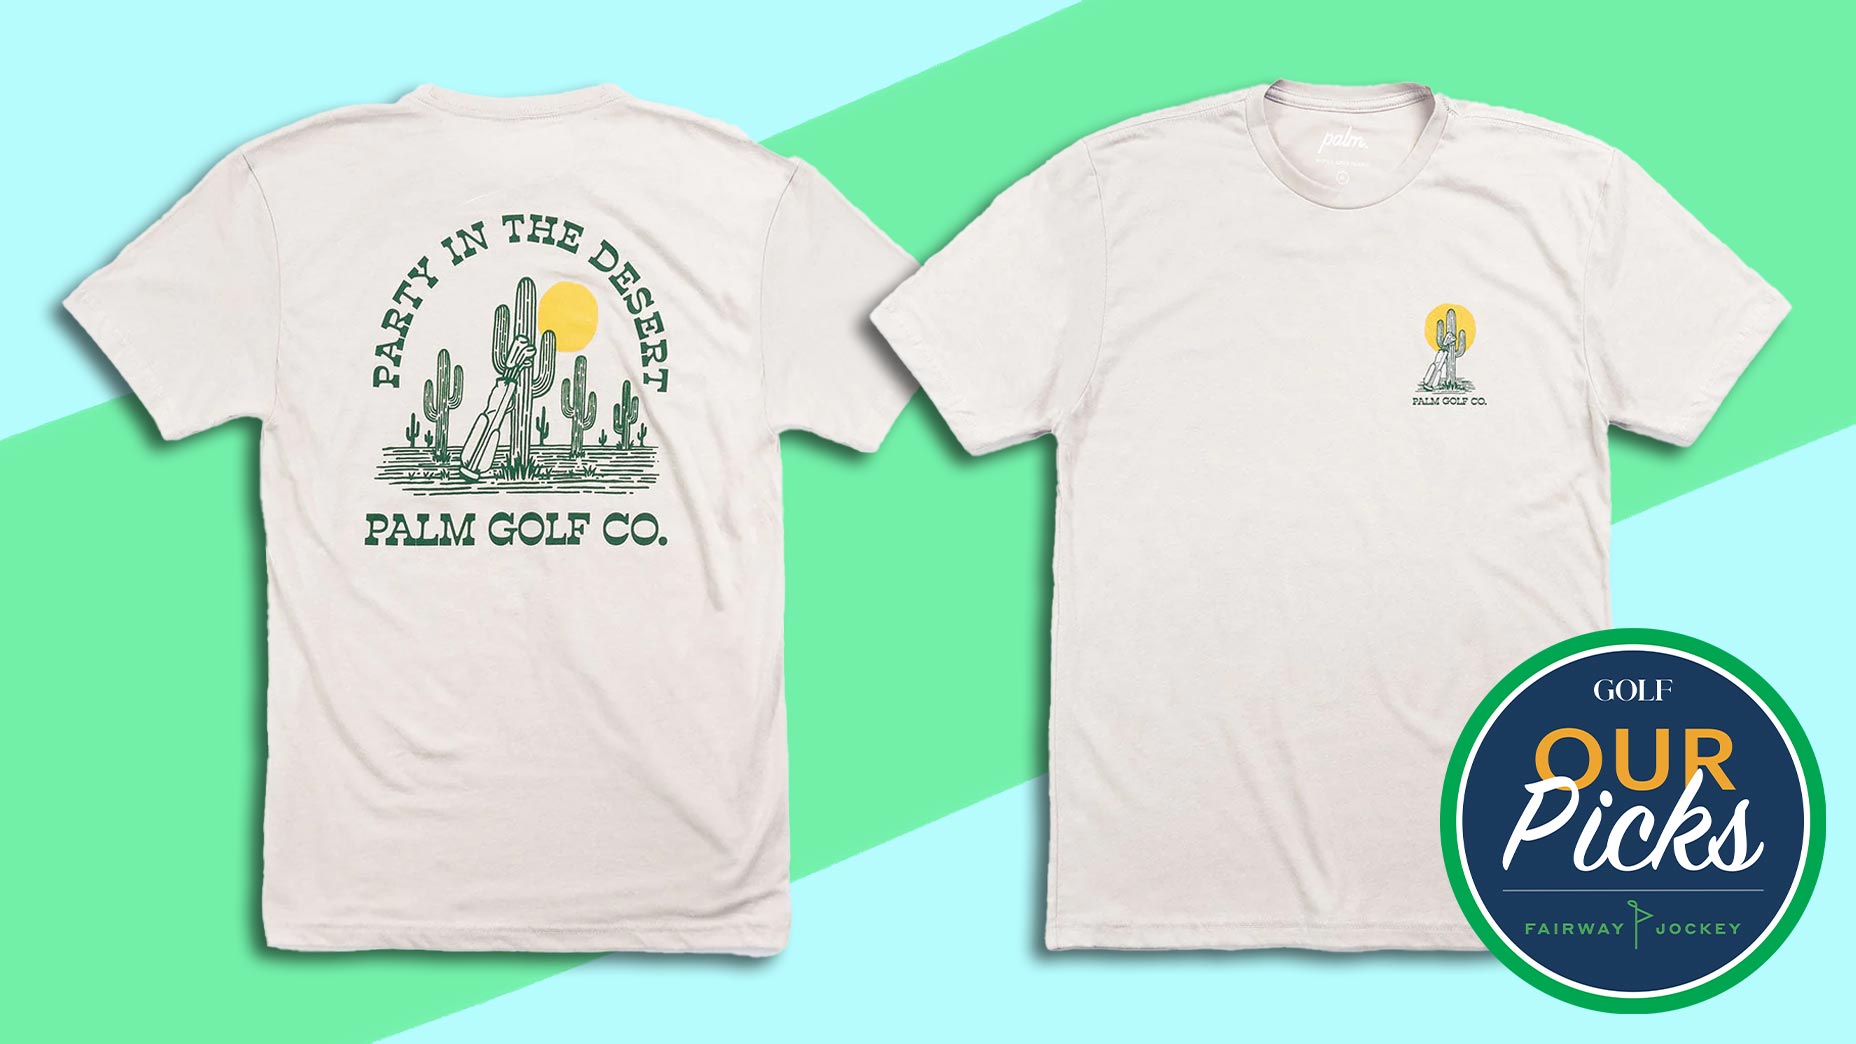 Tune in and watch "The Greatest Show on Grass," and throw on your favorite cactus-themed merch. Don't have any? Check out this t-shirt.